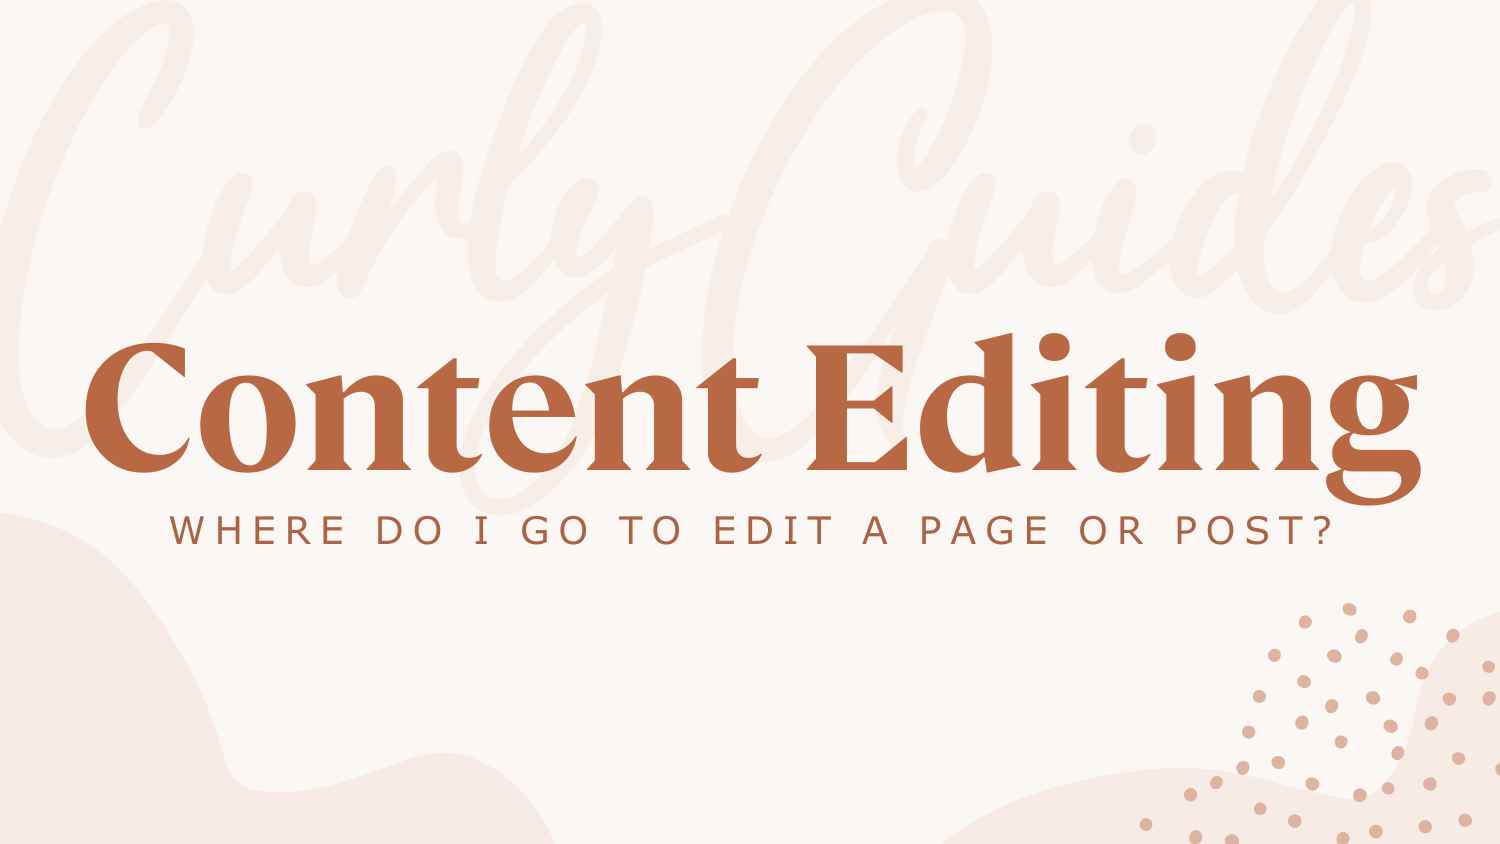 Content Editing – Where do I go to edit a page or post?